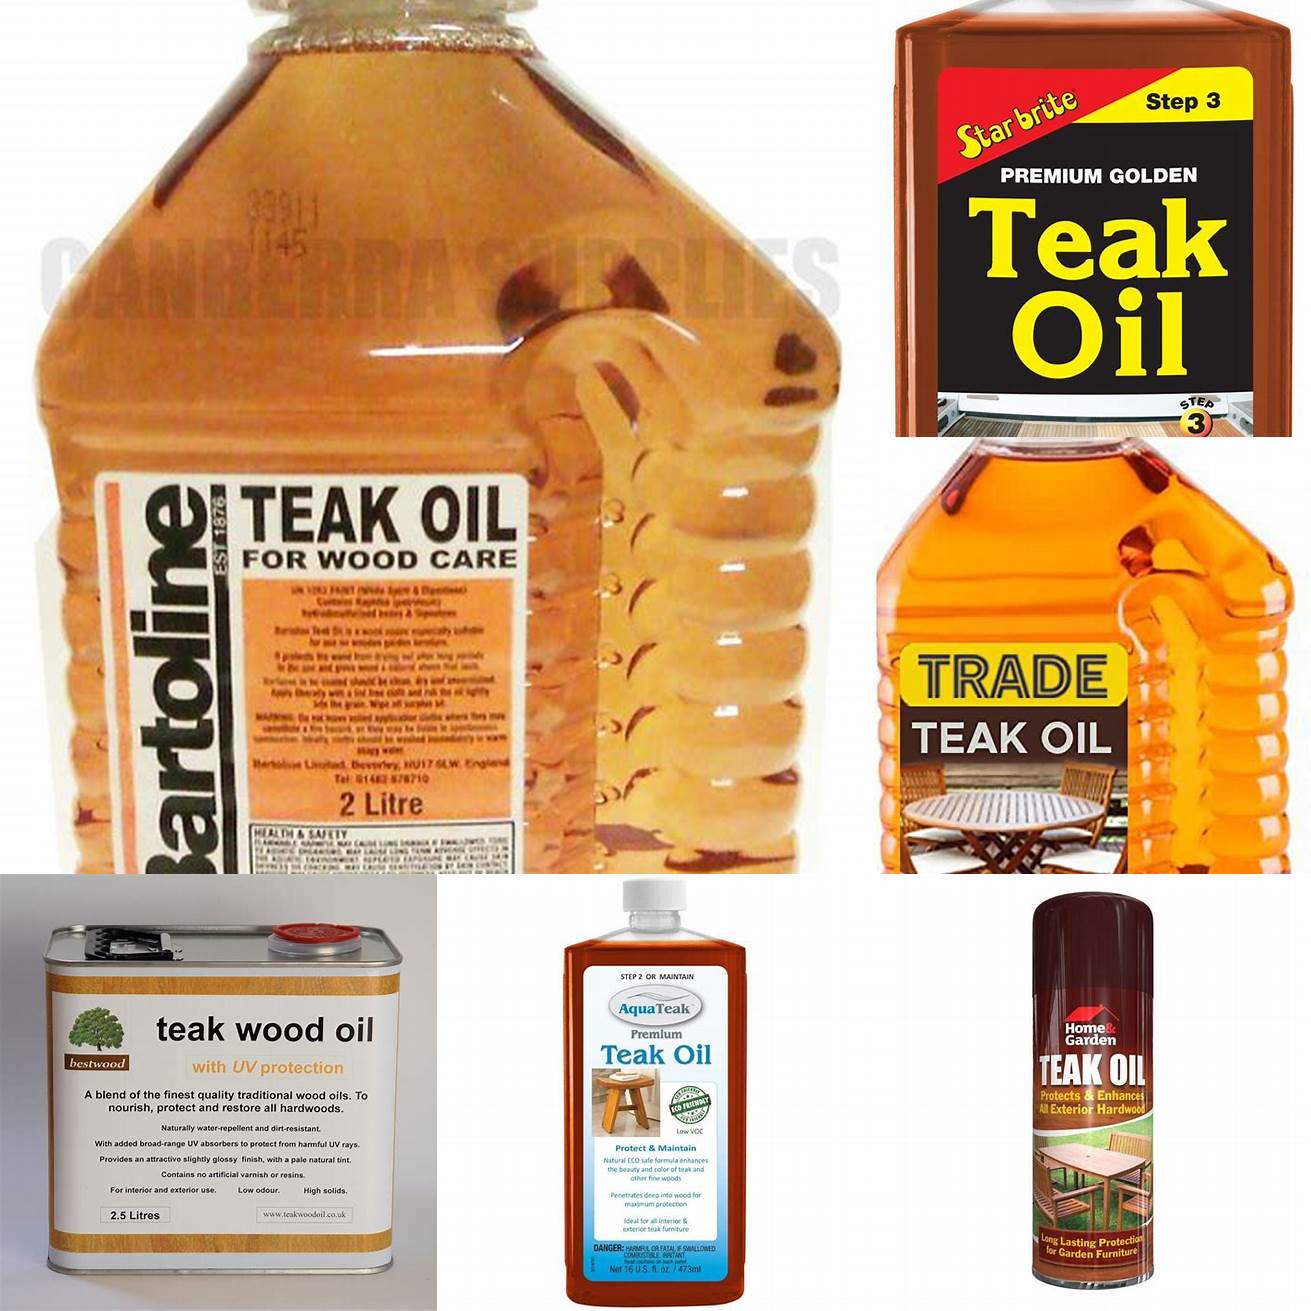 Picture of a container of teak oil